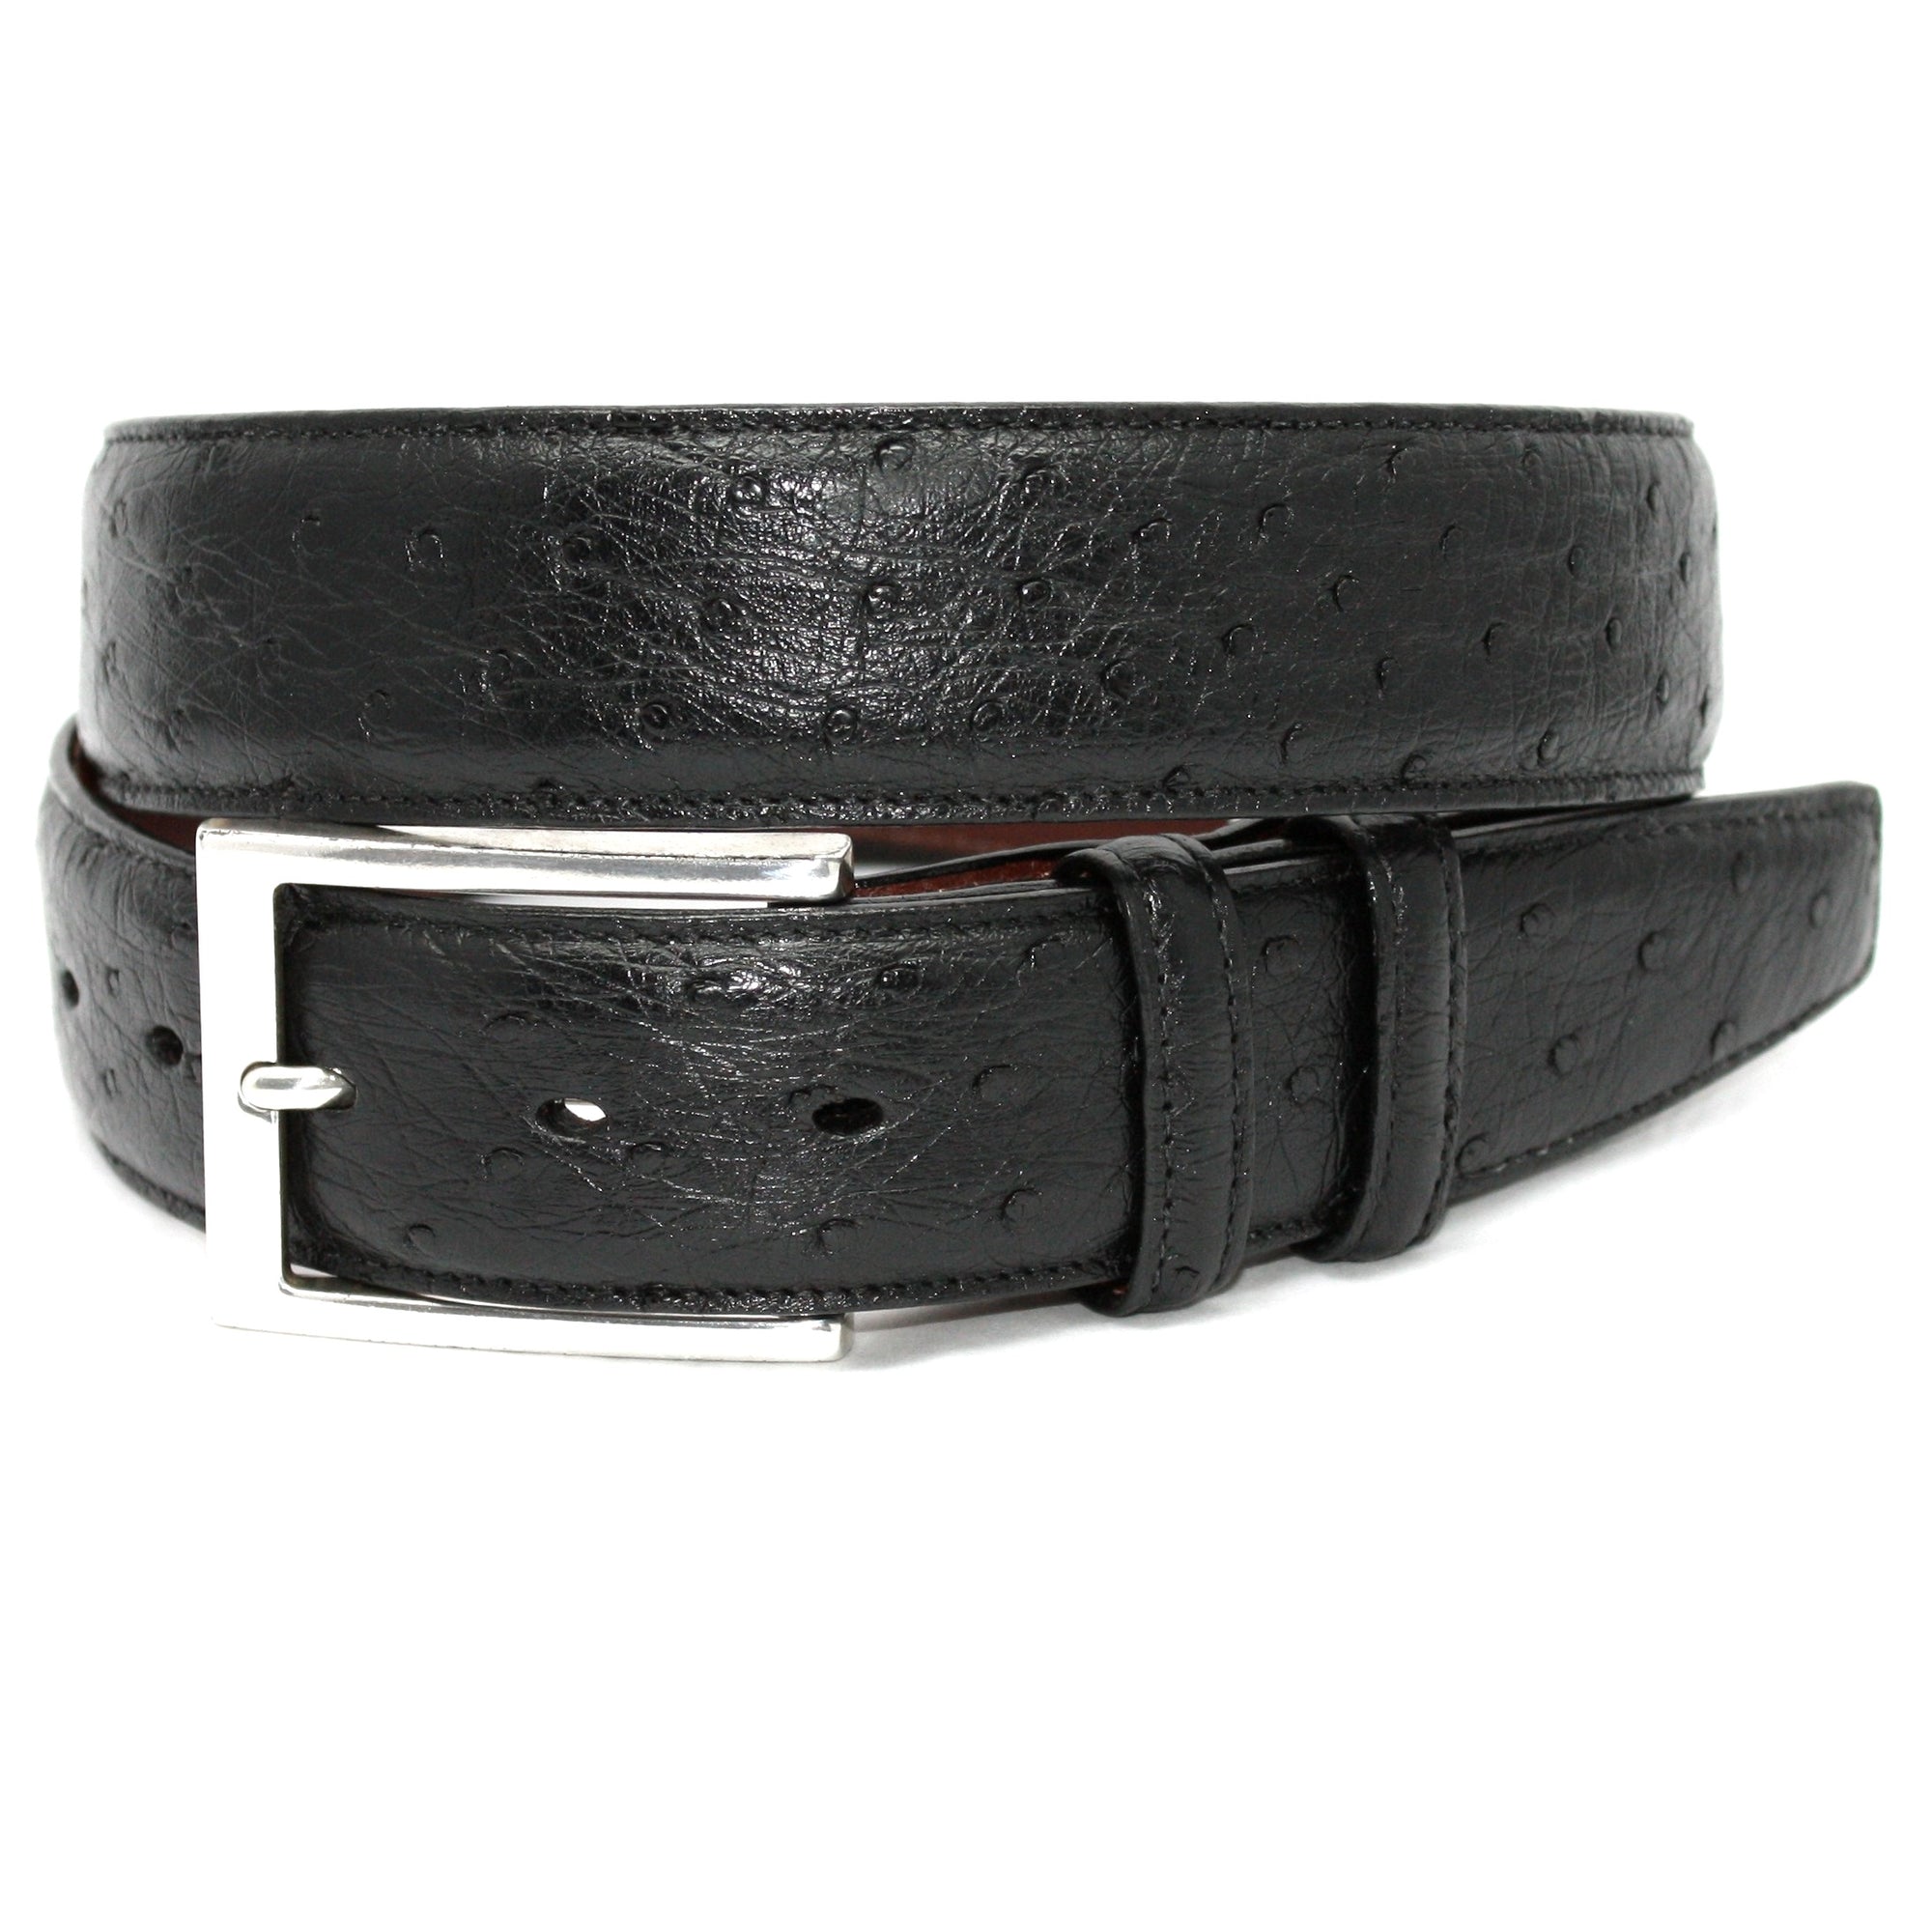 Genuine South African Ostrich Belt in Black by Torino Leather